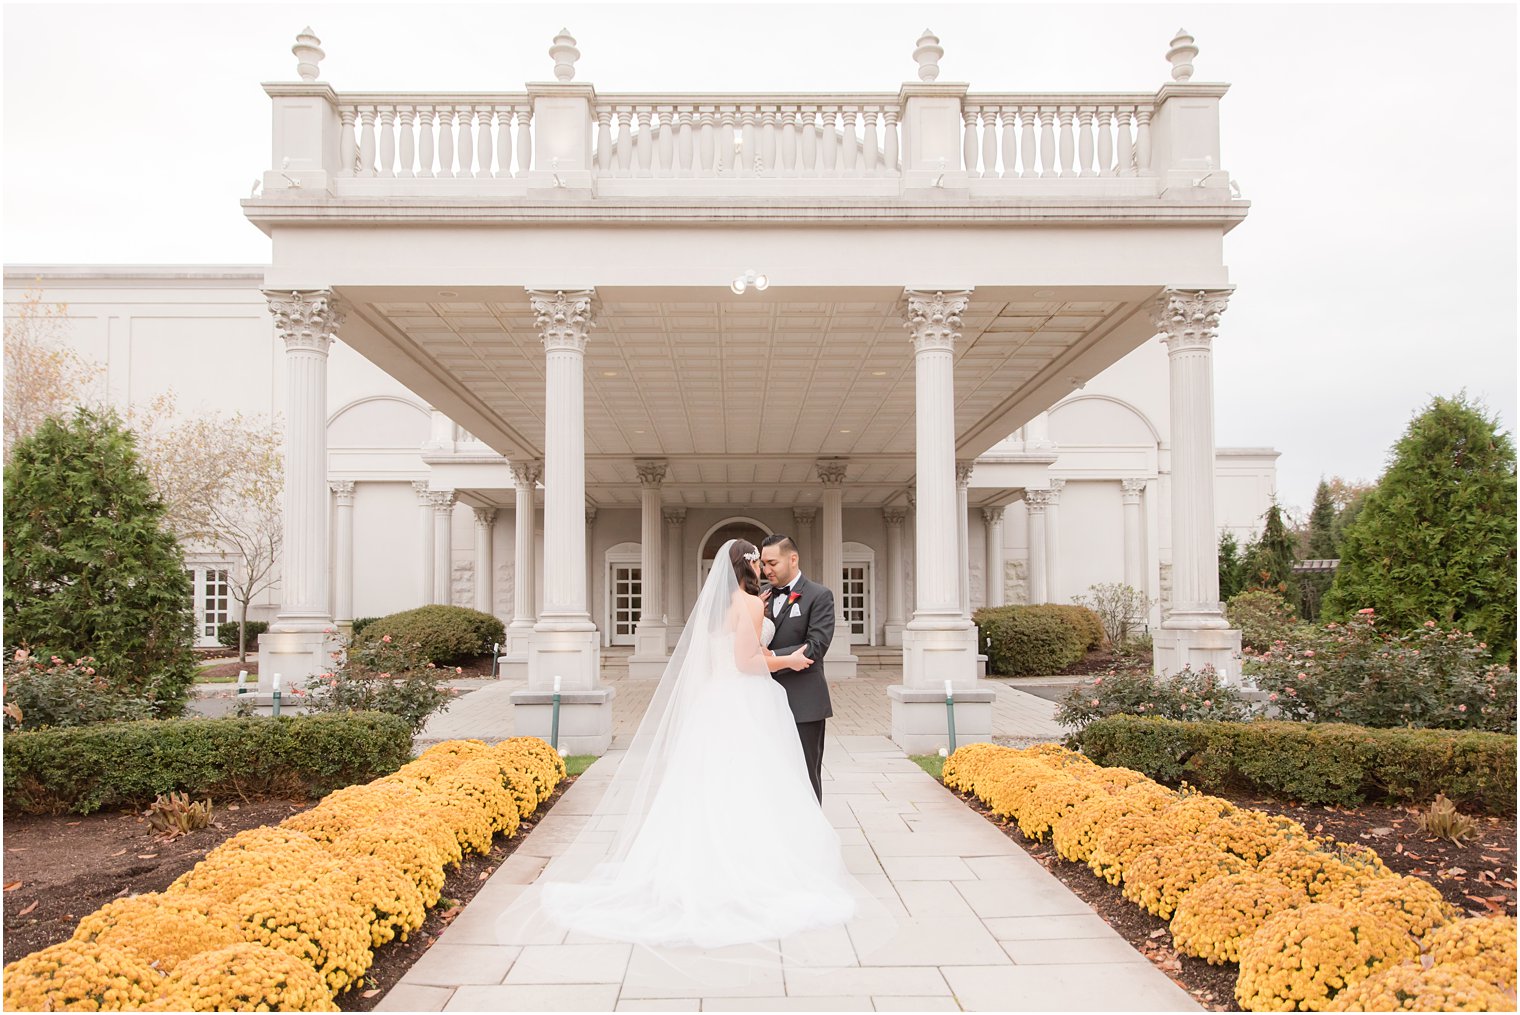 Wedding at The Palace at Somerset Park photographed by Idalia Photography